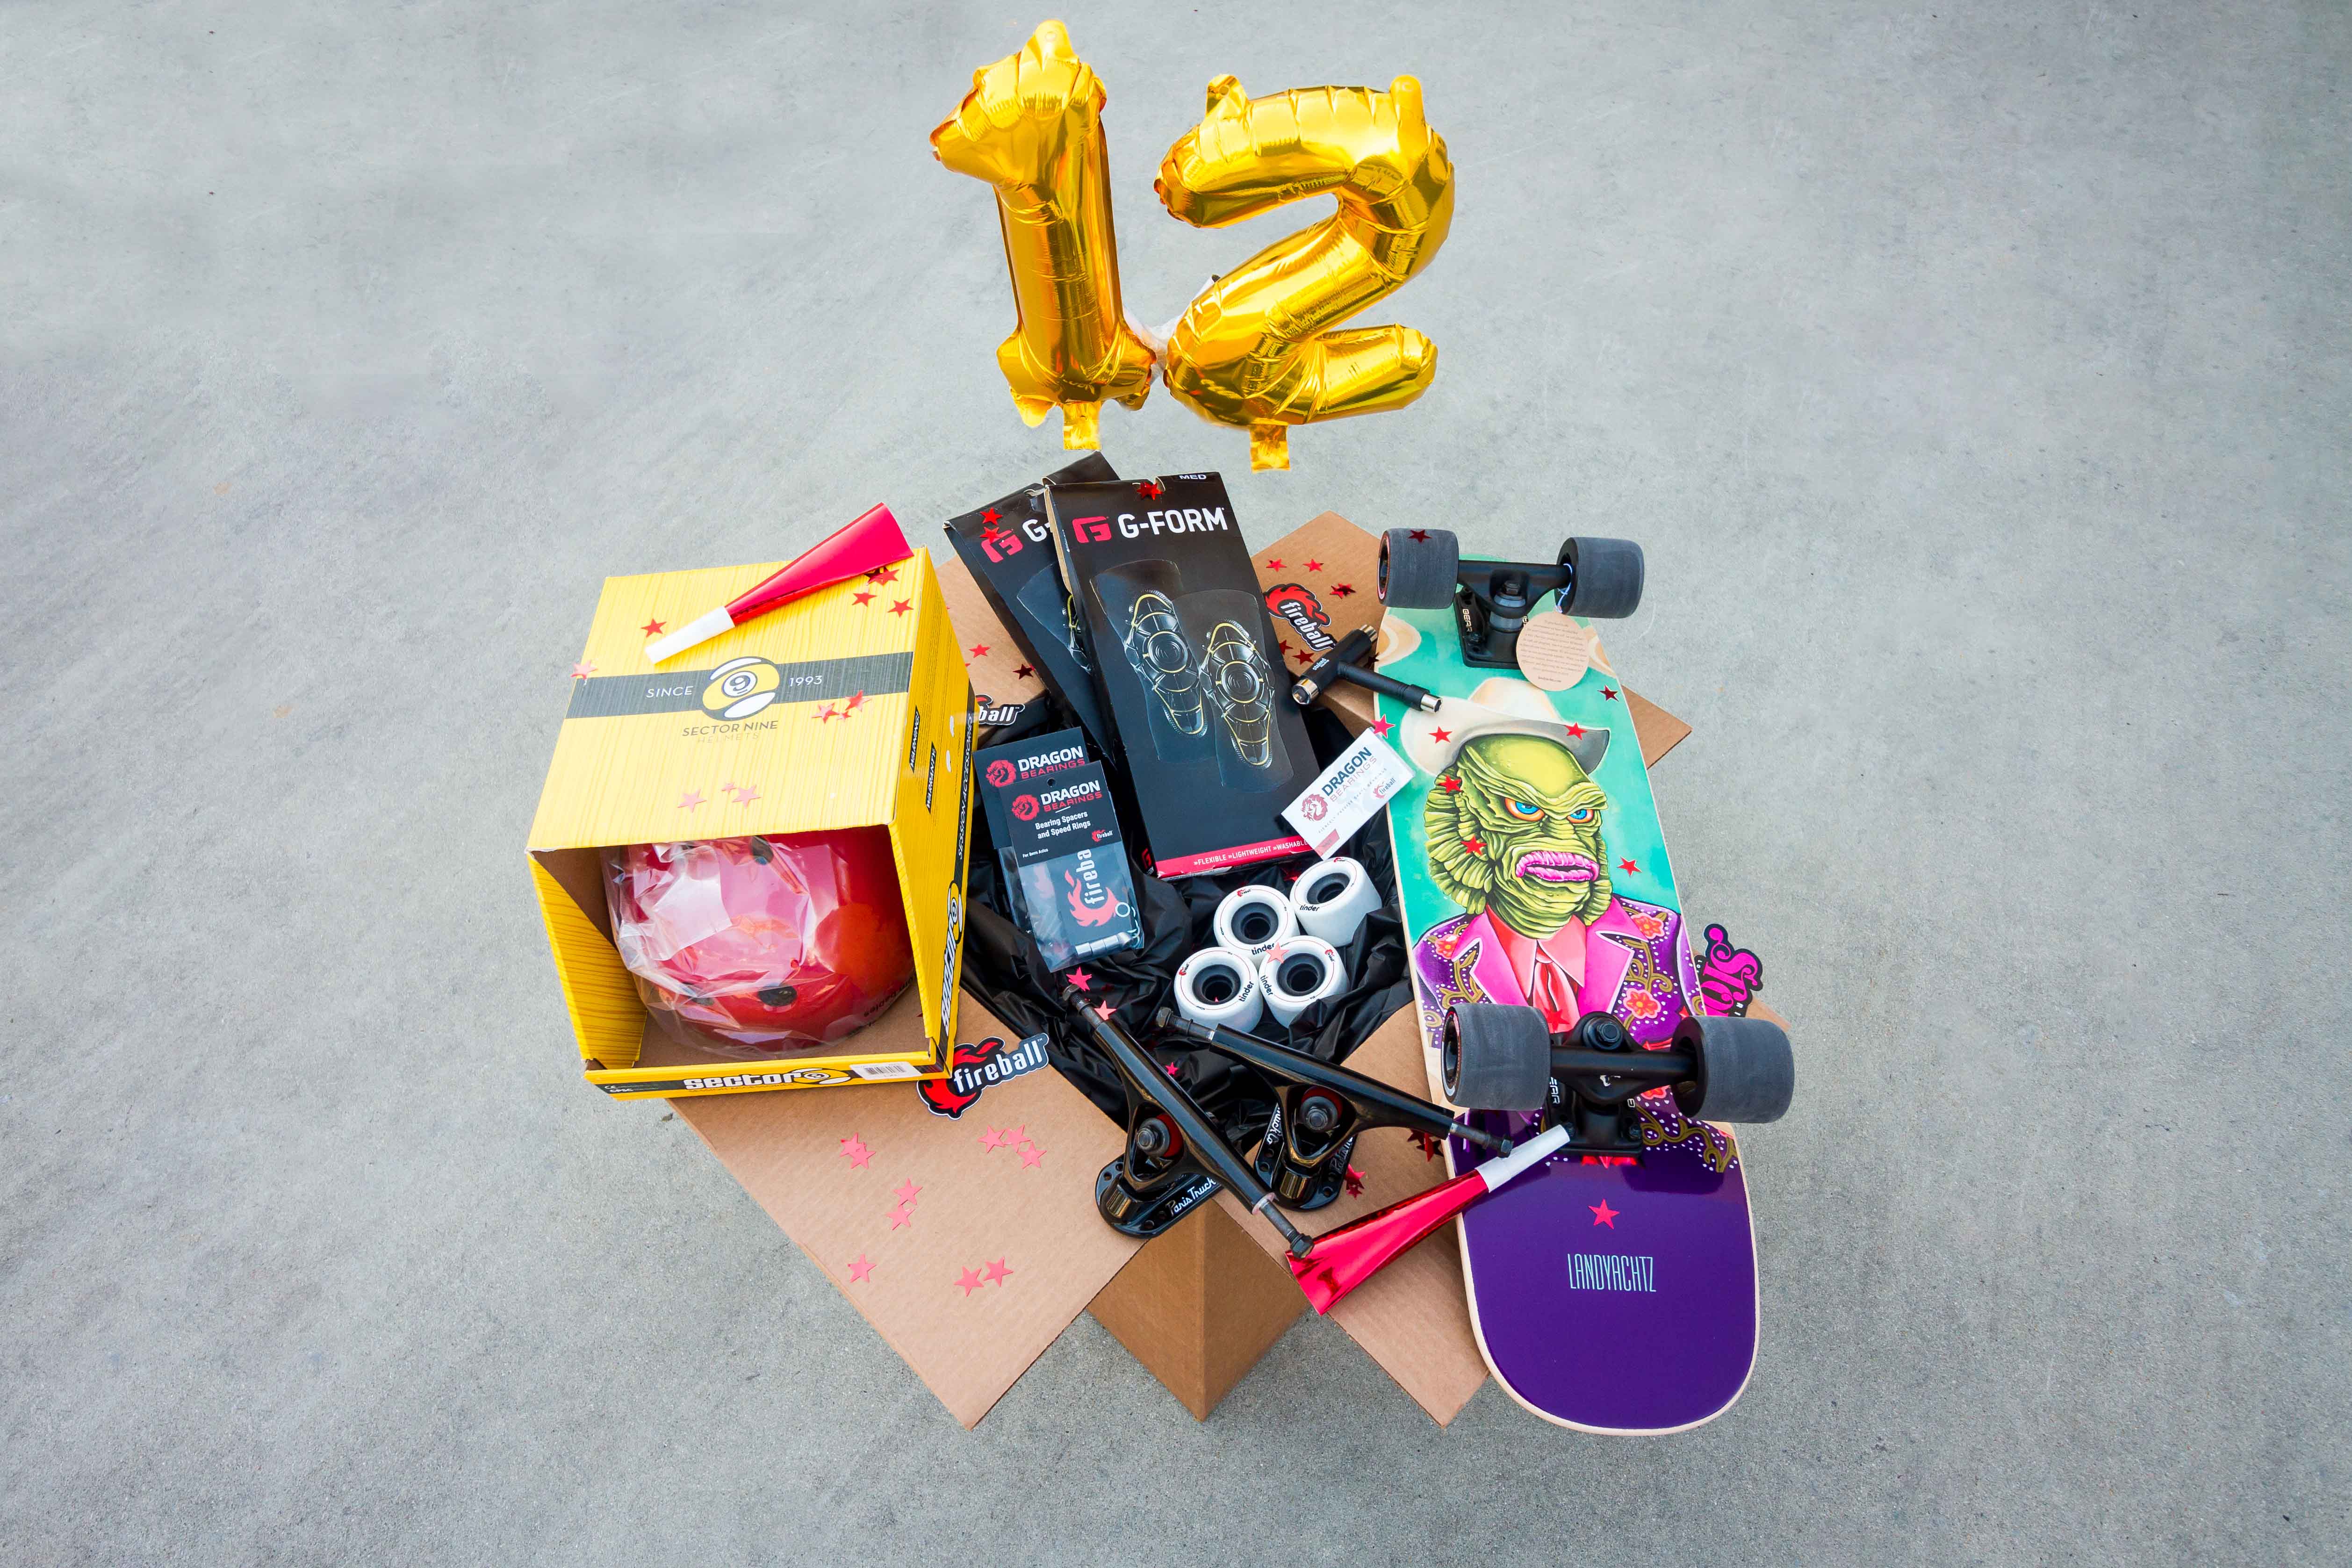 Longboard Give Away Landyachtz Dingy Sector 9 G Form and Fireball Tinder Wheels Dragon Bearings